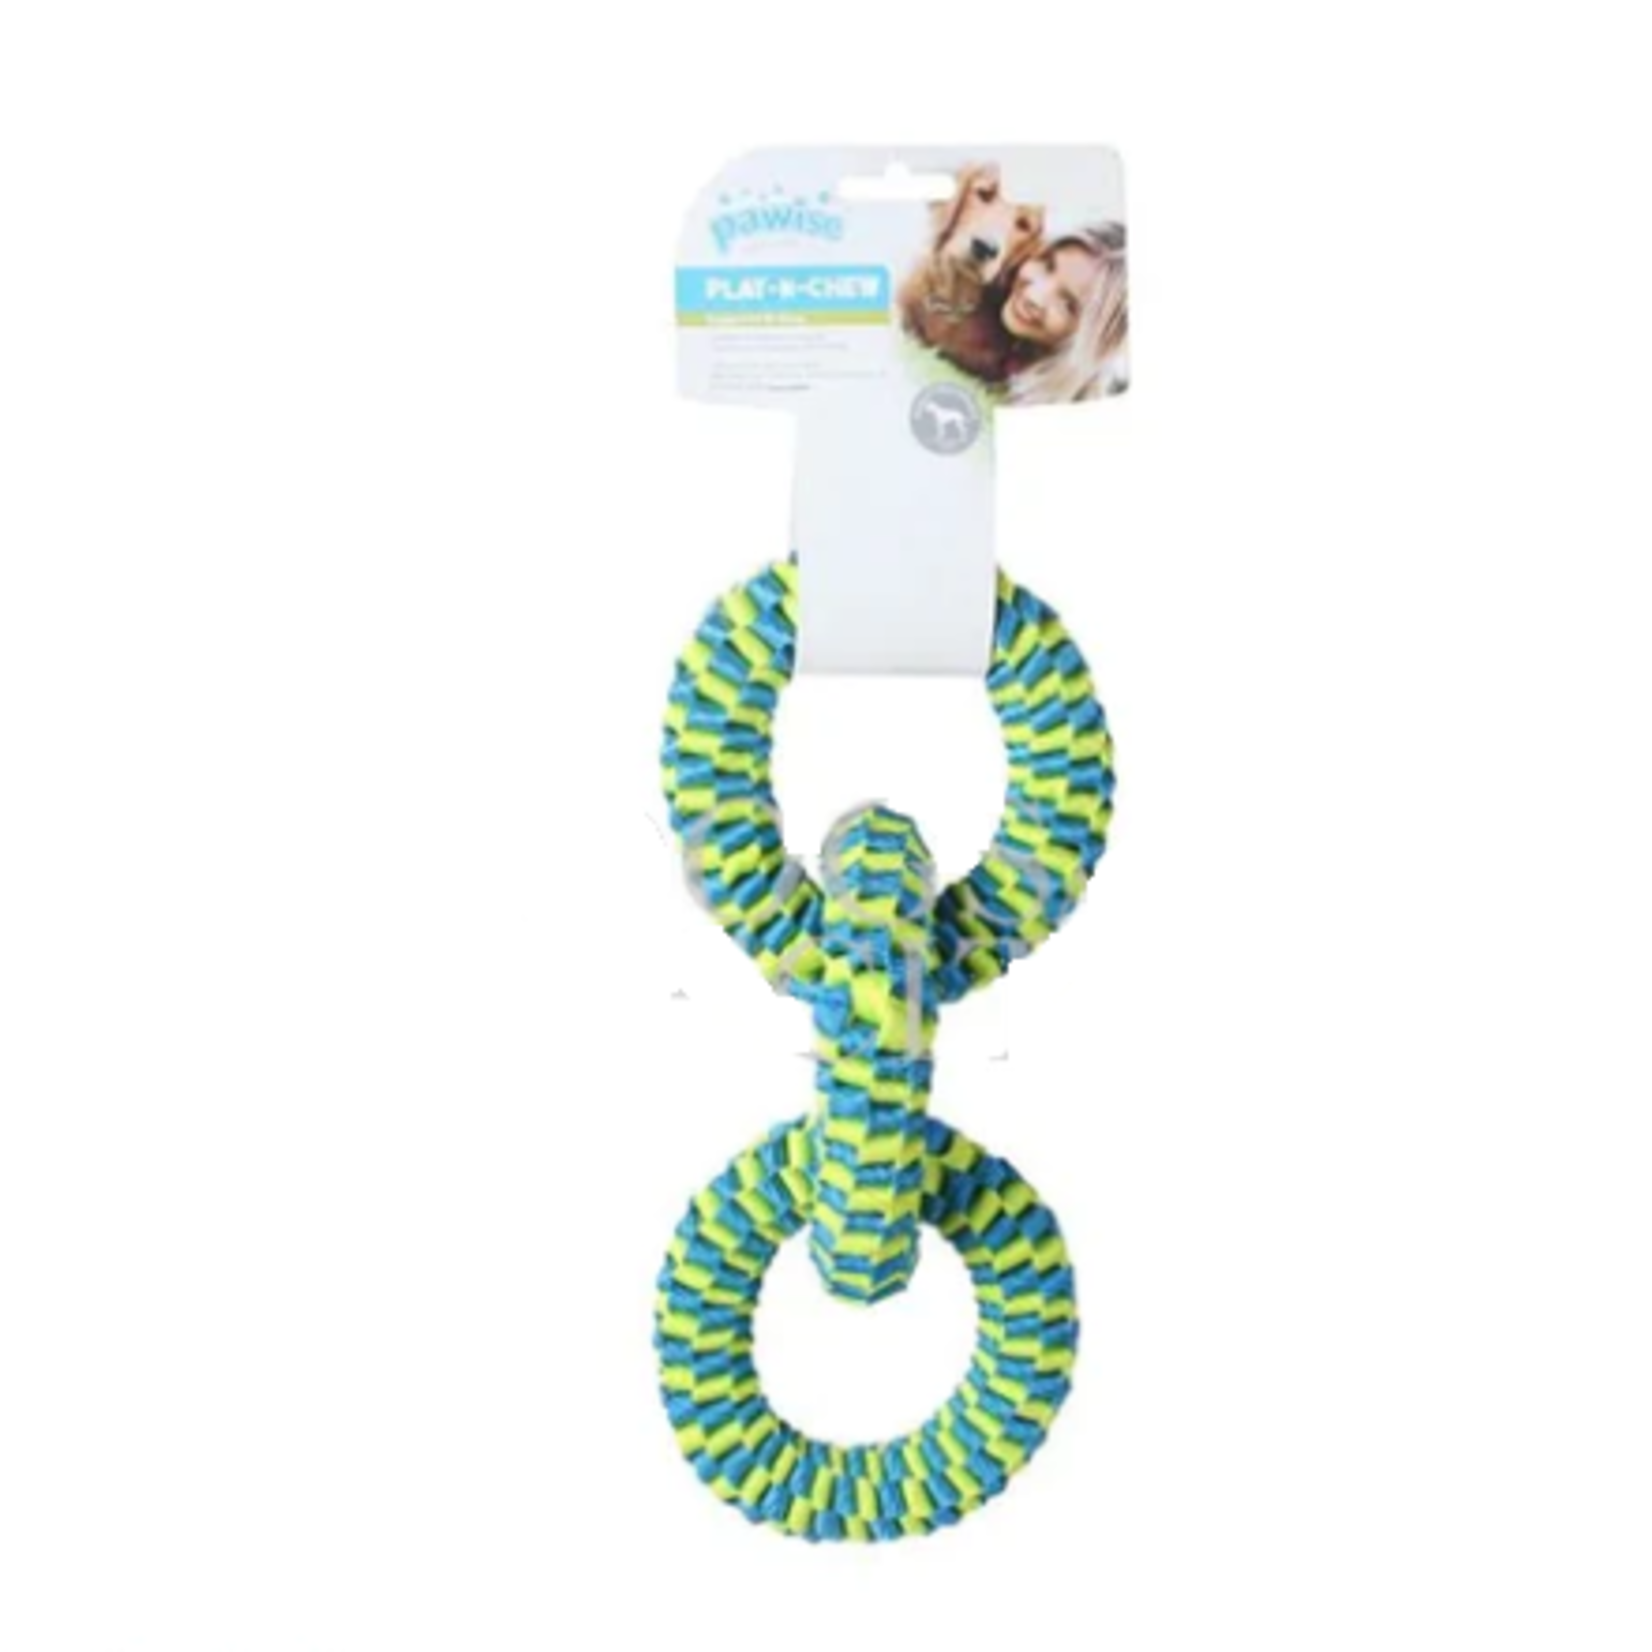 Pawise Nylon Braided - 3 Rings - Play and Chew - 12 po